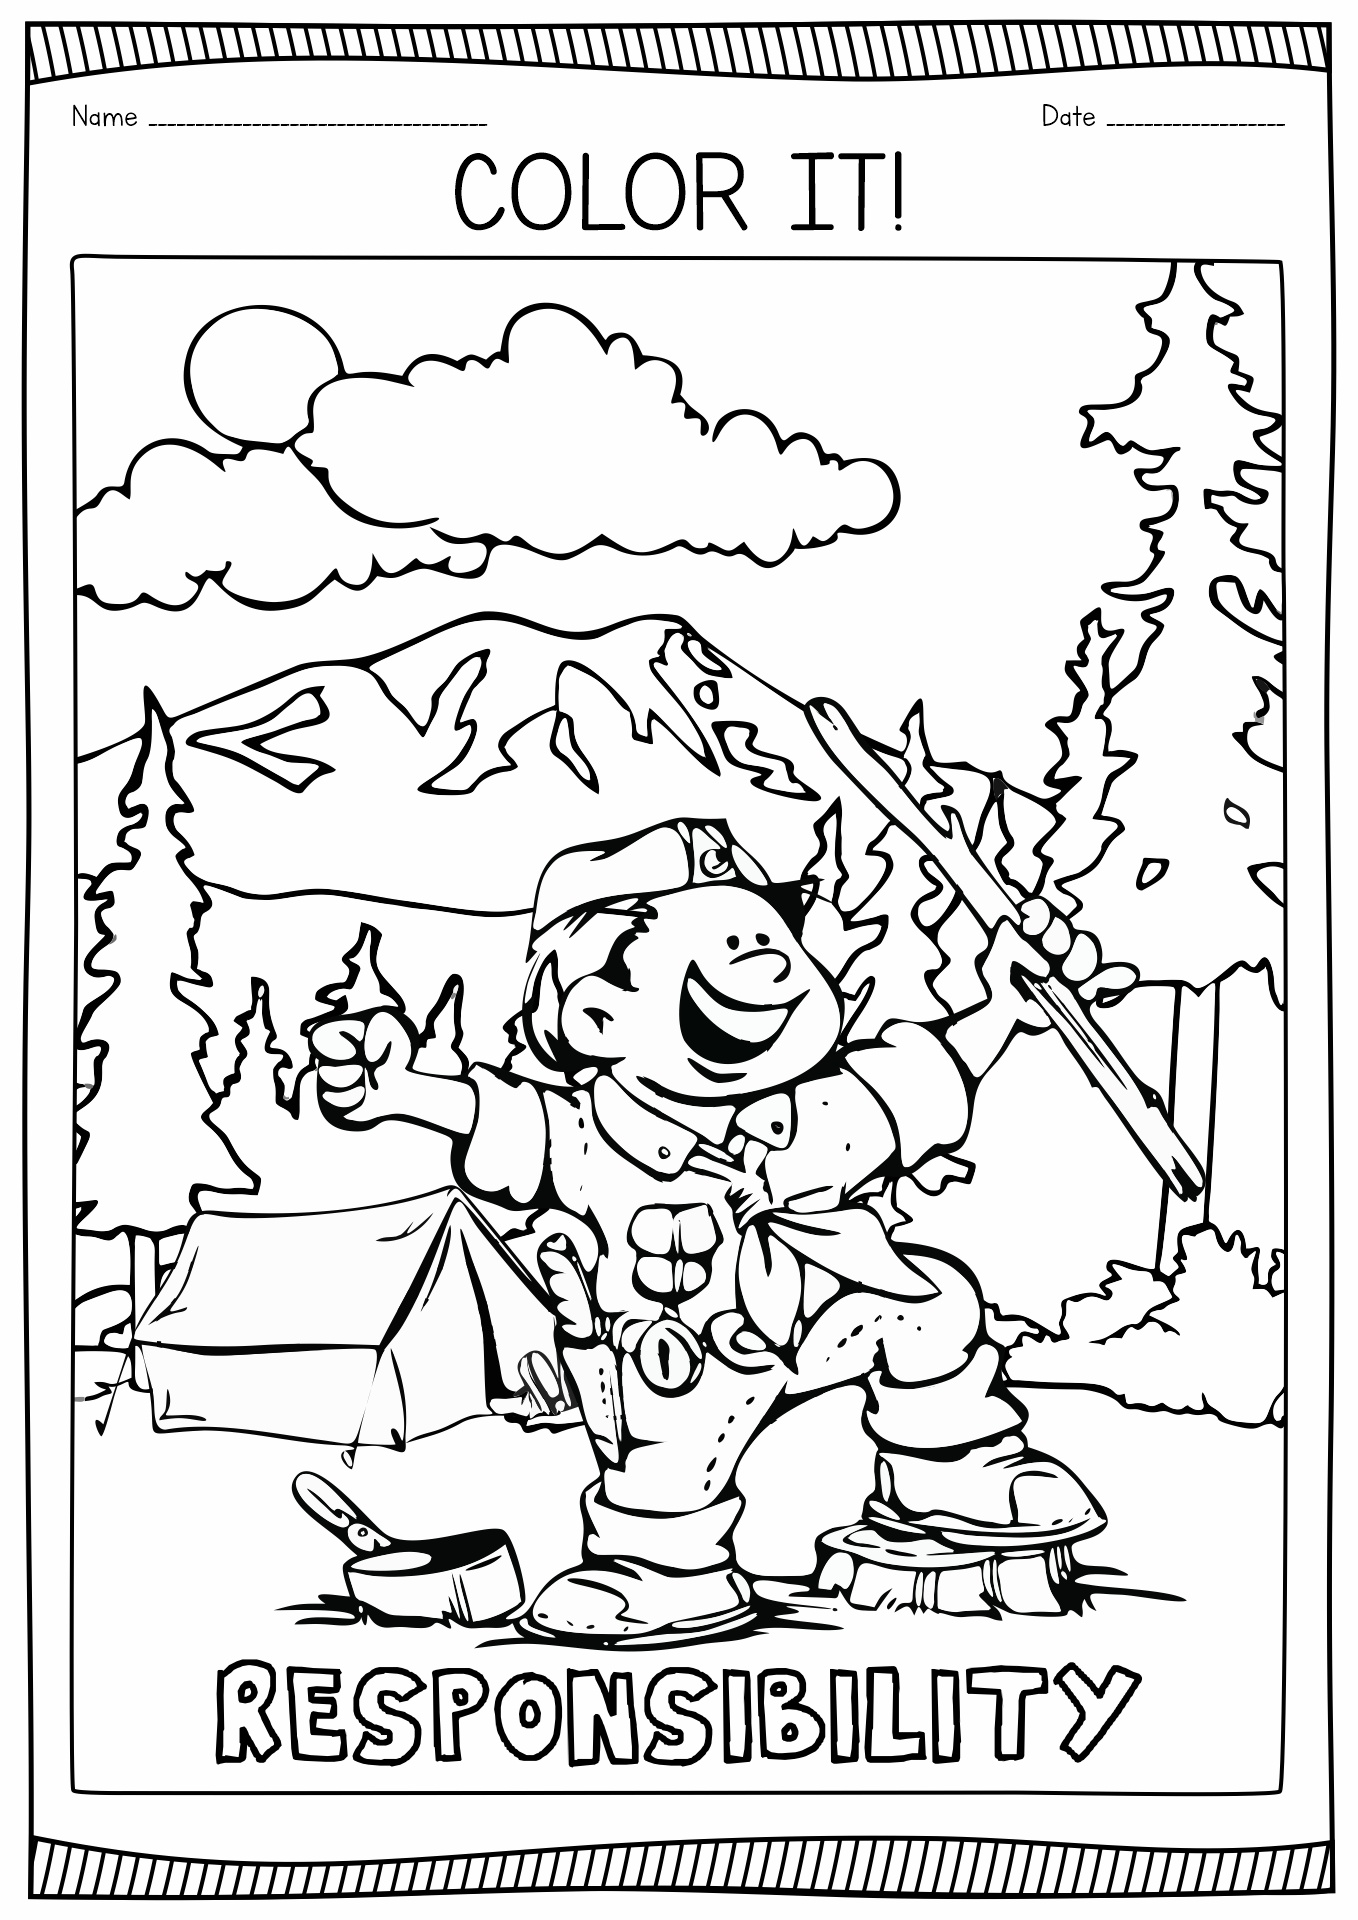 Cub Scout Responsibility Coloring Page